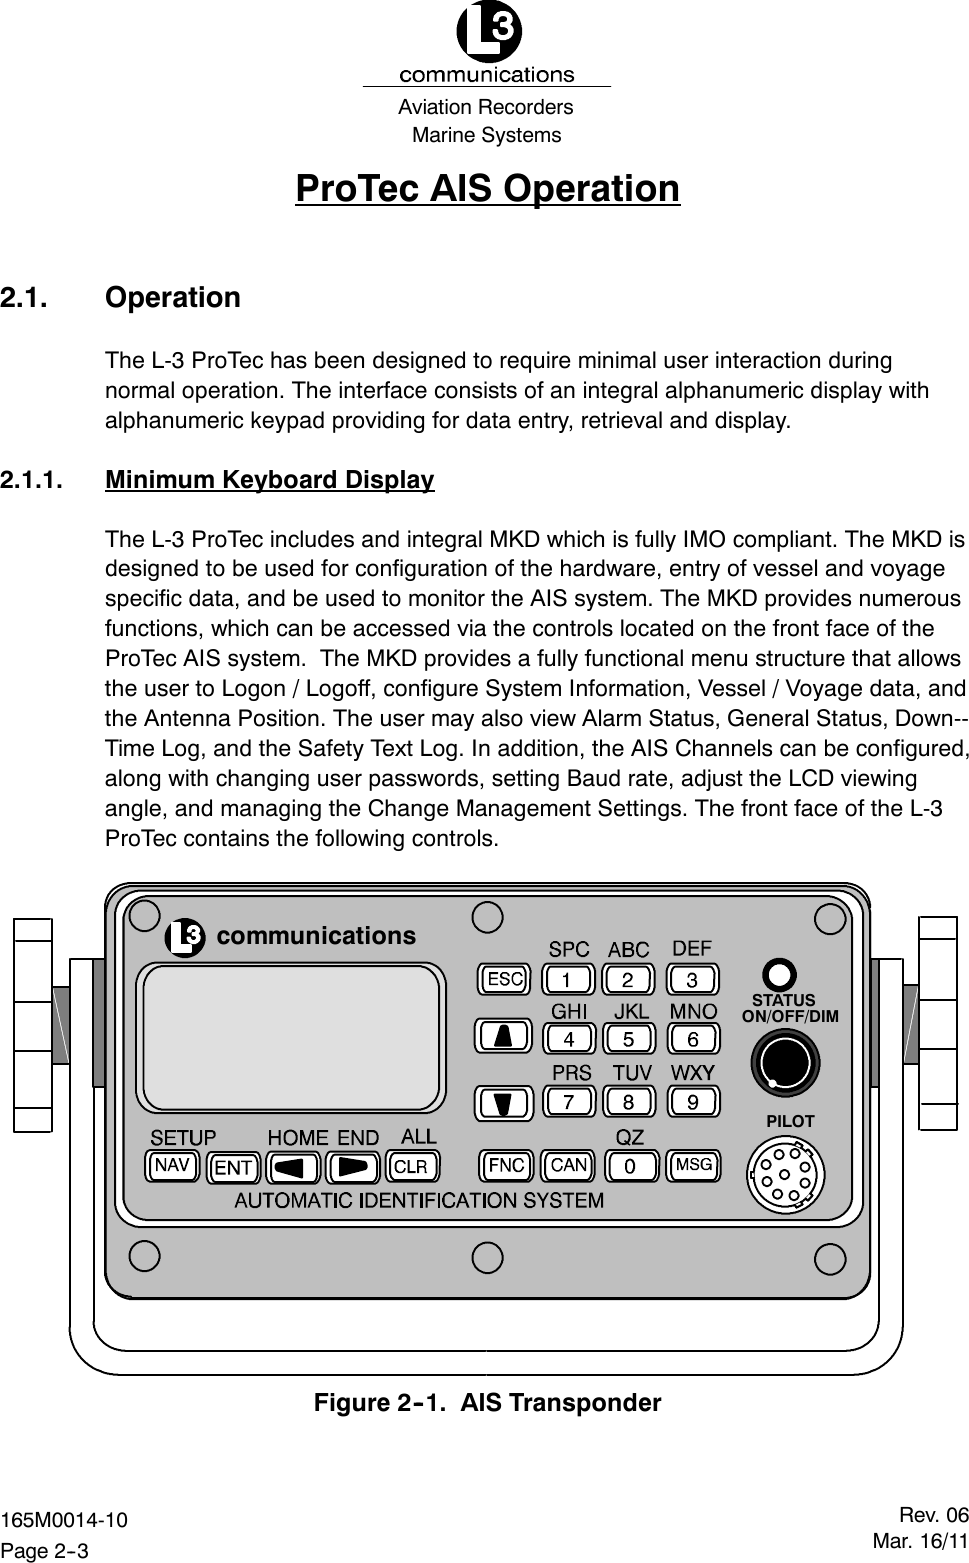 Marine SystemsAviation RecordersRev. 06Mar. 16/11165M0014-10Page 2--3ProTec AIS Operation2.1. OperationThe L-3 ProTec has been designed to require minimal user interaction duringnormal operation. The interface consists of an integral alphanumeric display withalphanumeric keypad providing for data entry, retrieval and display.2.1.1. Minimum Keyboard DisplayThe L-3 ProTec includes and integral MKD which is fully IMO compliant. The MKD isdesigned to be used for configuration of the hardware, entry of vessel and voyagespecific data, and be used to monitor the AIS system. The MKD provides numerousfunctions, which can be accessed via the controls located on the front face of theProTec AIS system. The MKD provides a fully functional menu structure that allowsthe user to Logon / Logoff, configure System Information, Vessel / Voyage data, andthe Antenna Position. The user may also view Alarm Status, General Status, Down--Time Log, and the Safety Text Log. In addition, the AIS Channels can be configured,along with changing user passwords, setting Baud rate, adjust the LCD viewingangle, and managing the Change Management Settings. The front face of the L-3ProTec contains the following controls.communicationsSTATUSON/OFF/DIMPILOTFigure 2--1. AIS Transponder